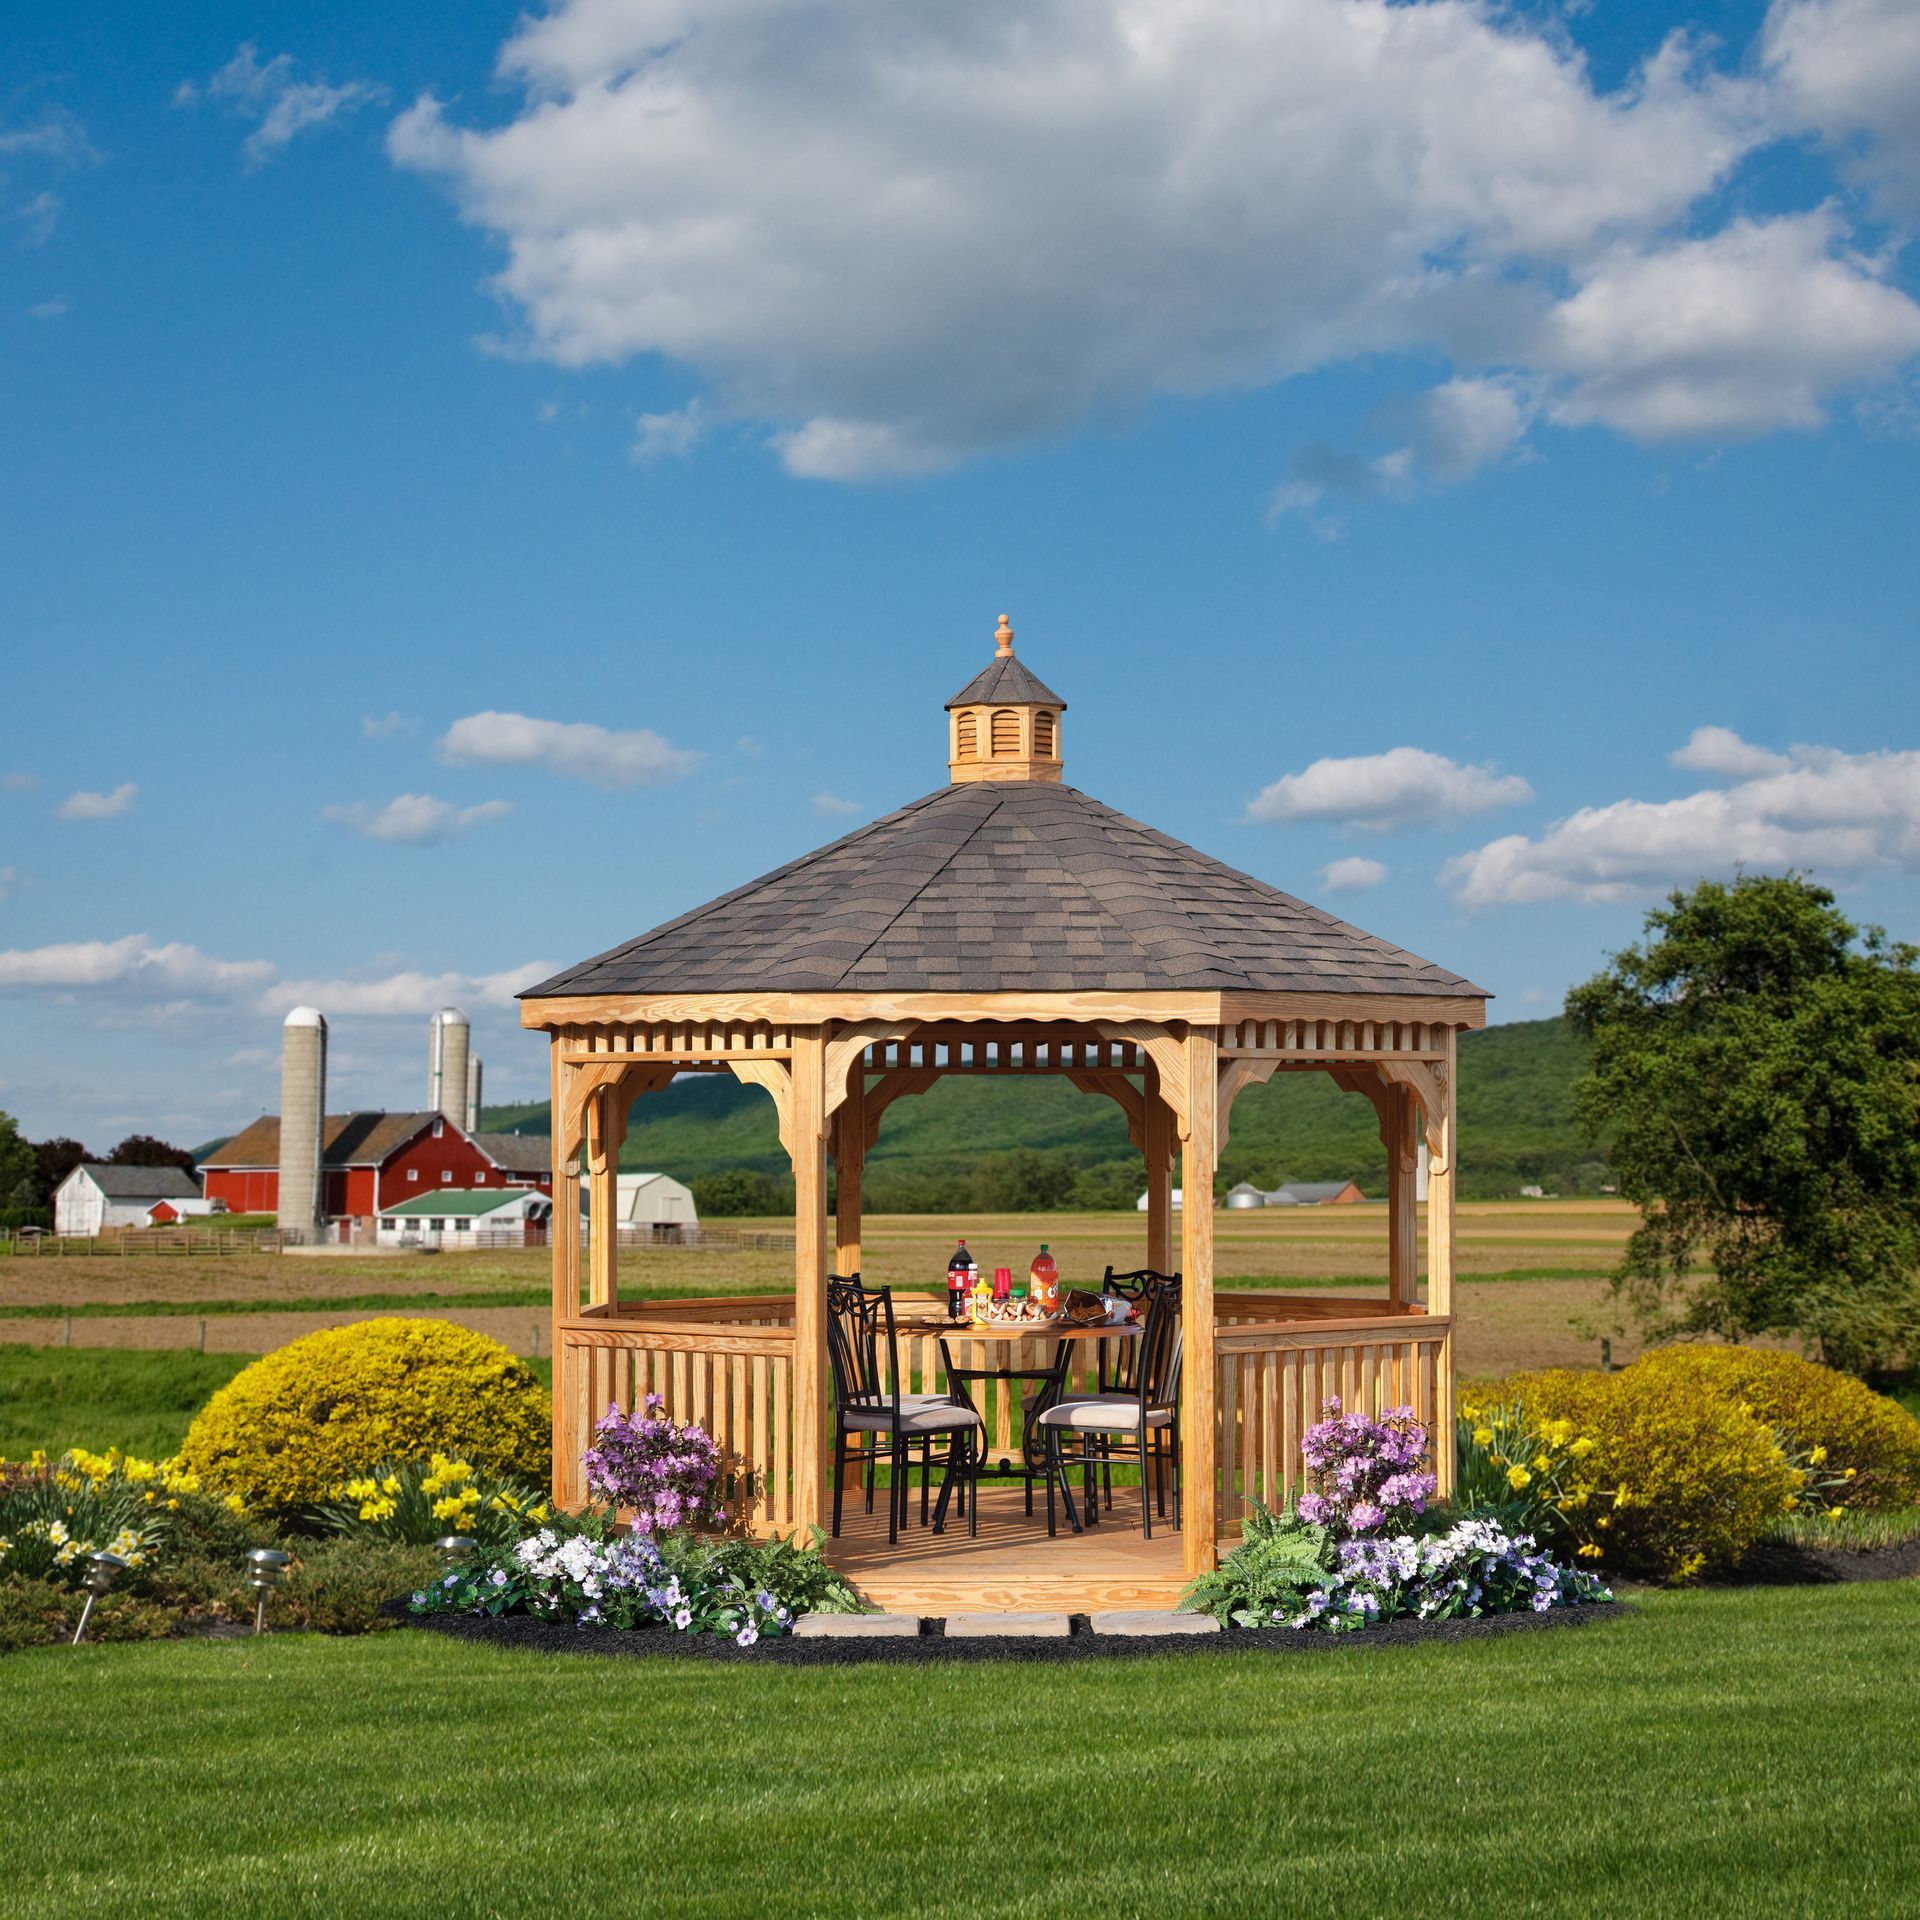 a gazebo with a table and chairs in the middle of a grassy fieldaz